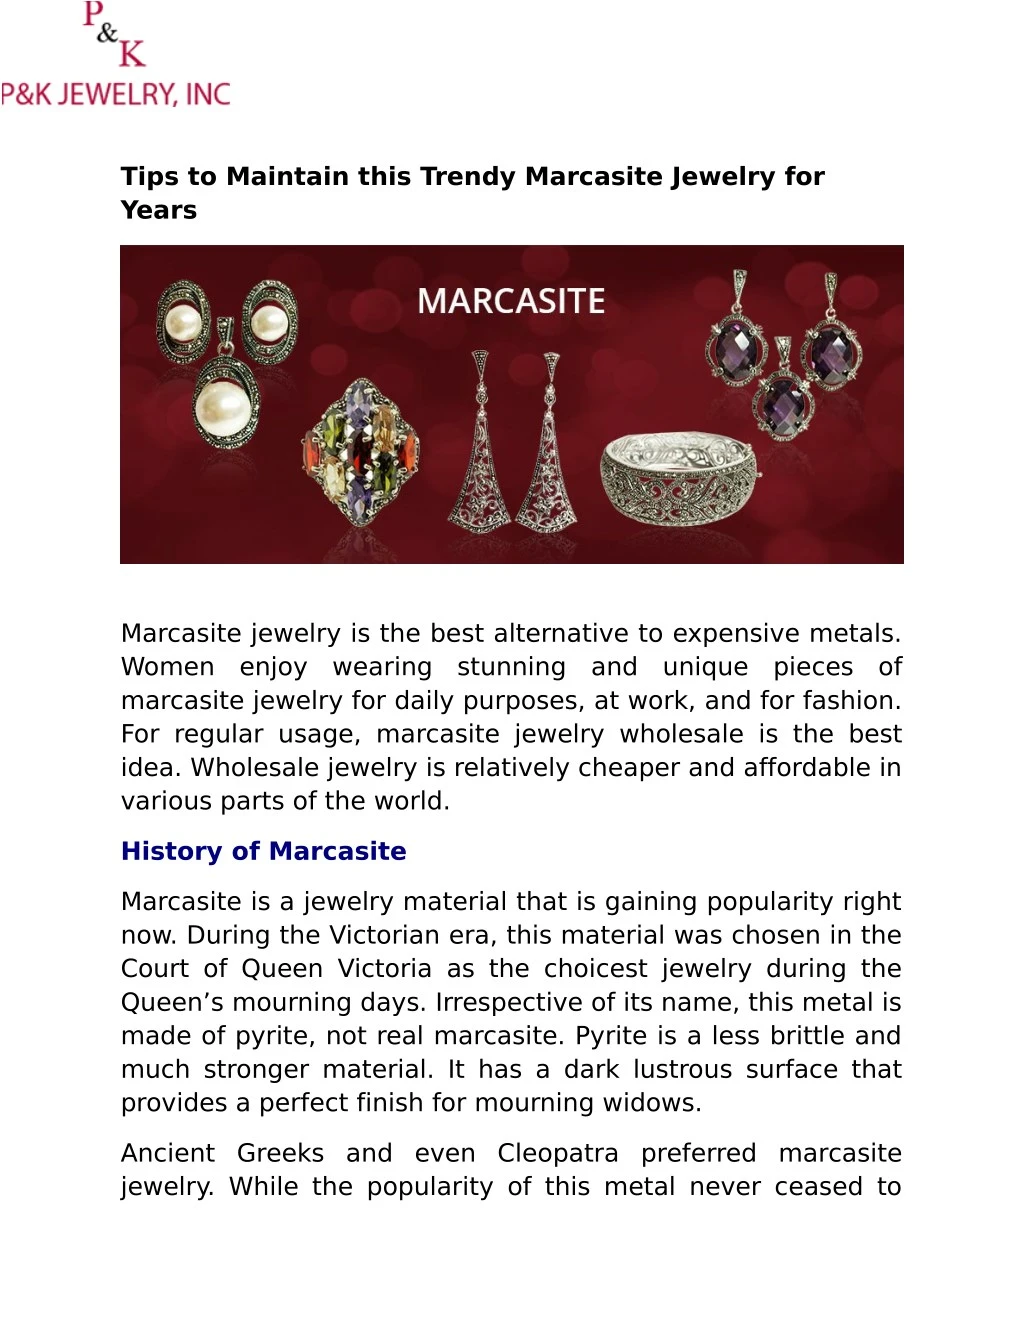 tips to maintain this trendy marcasite jewelry